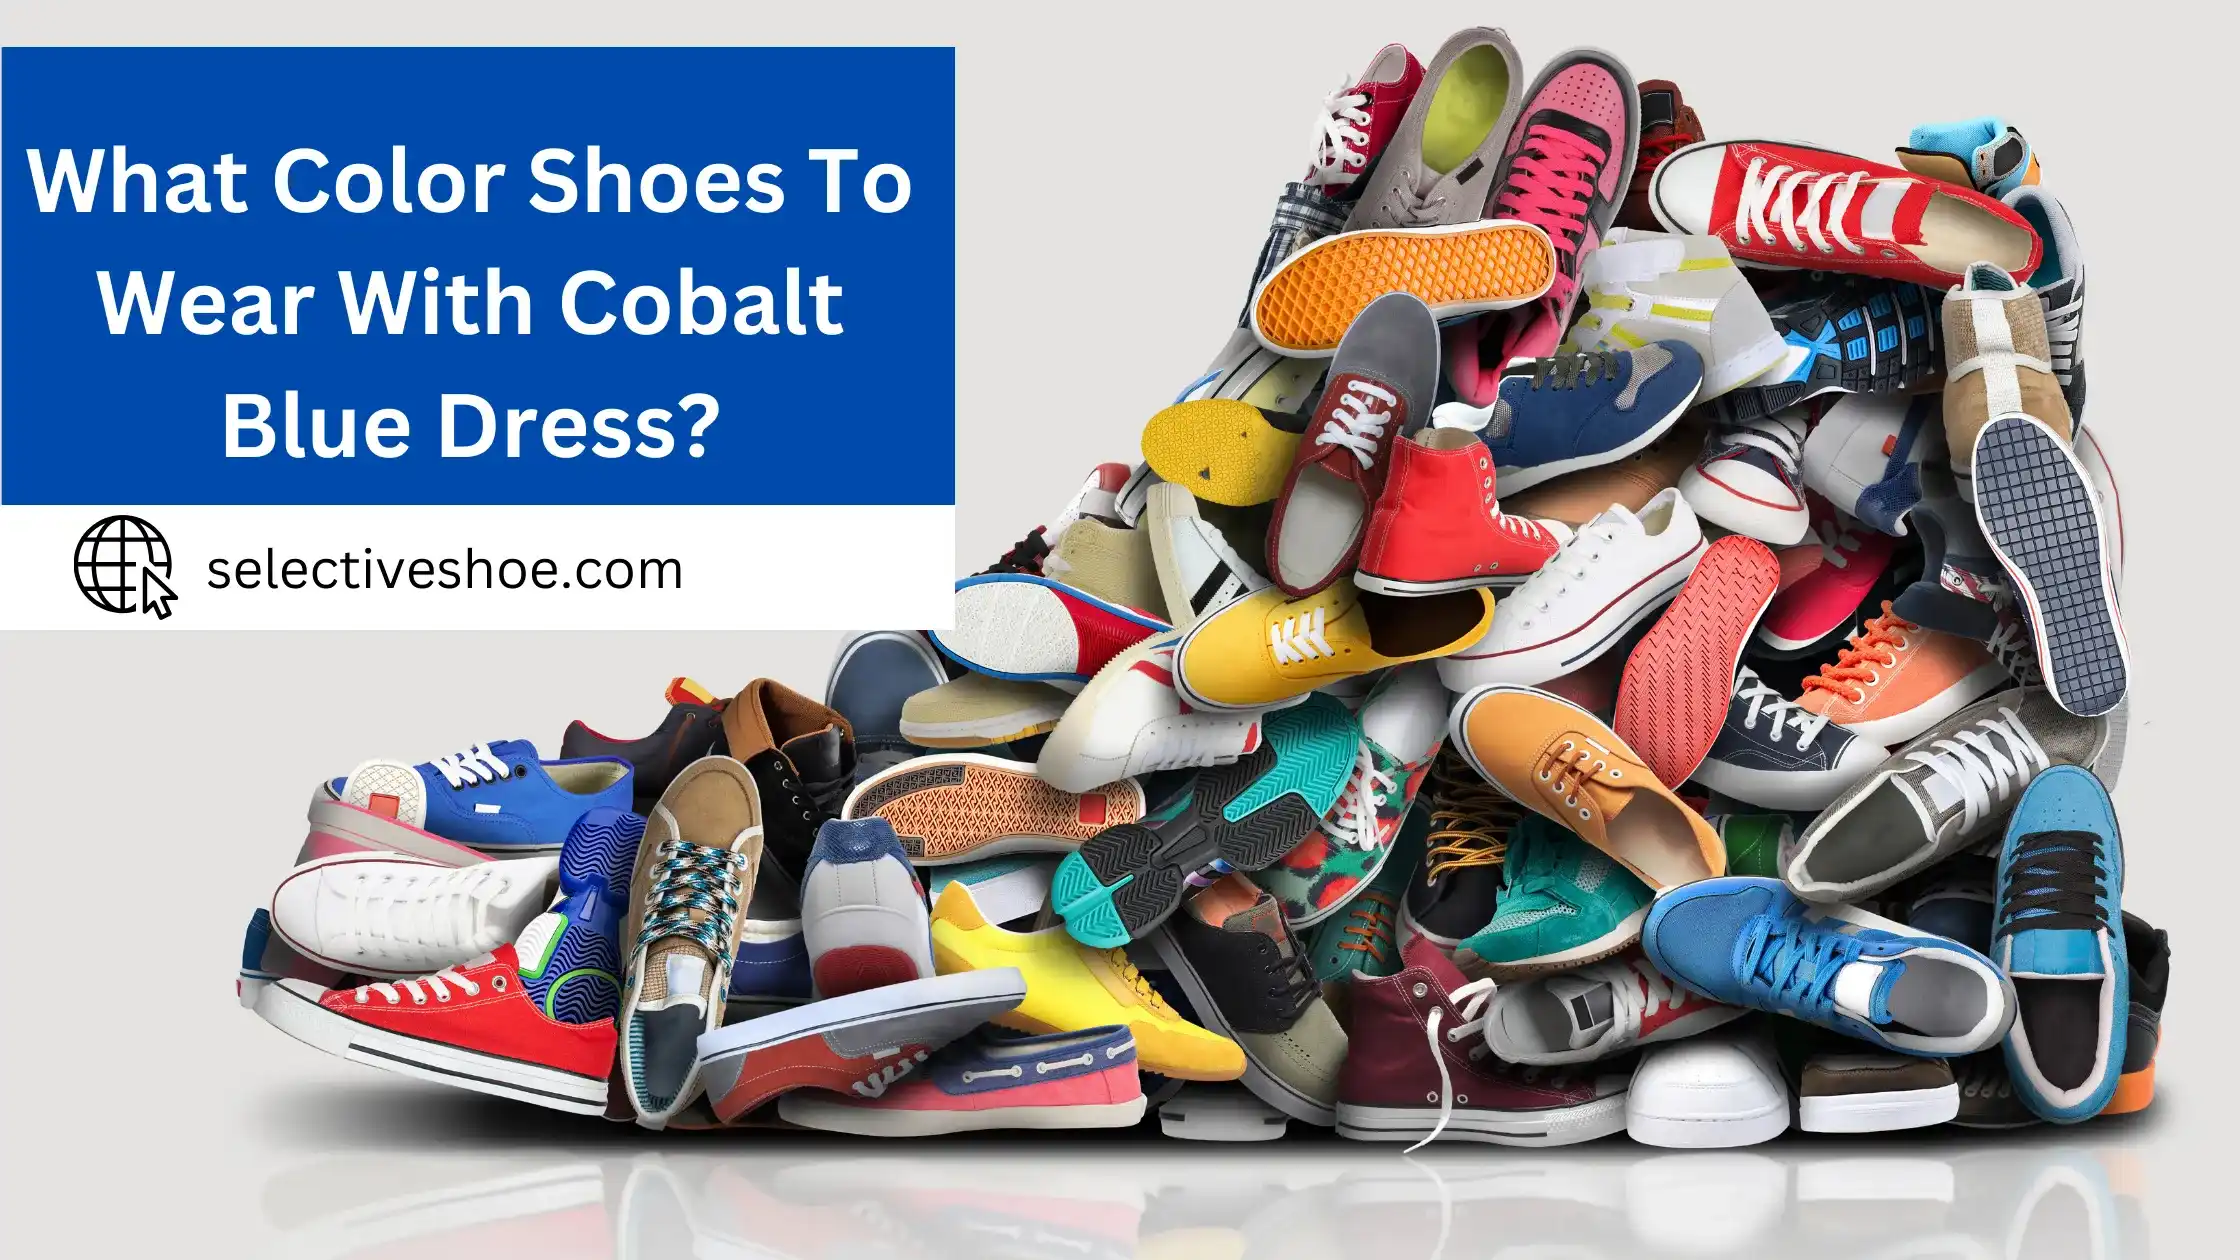 What Color Shoes To Wear With Cobalt Blue Dress? Easy Ways